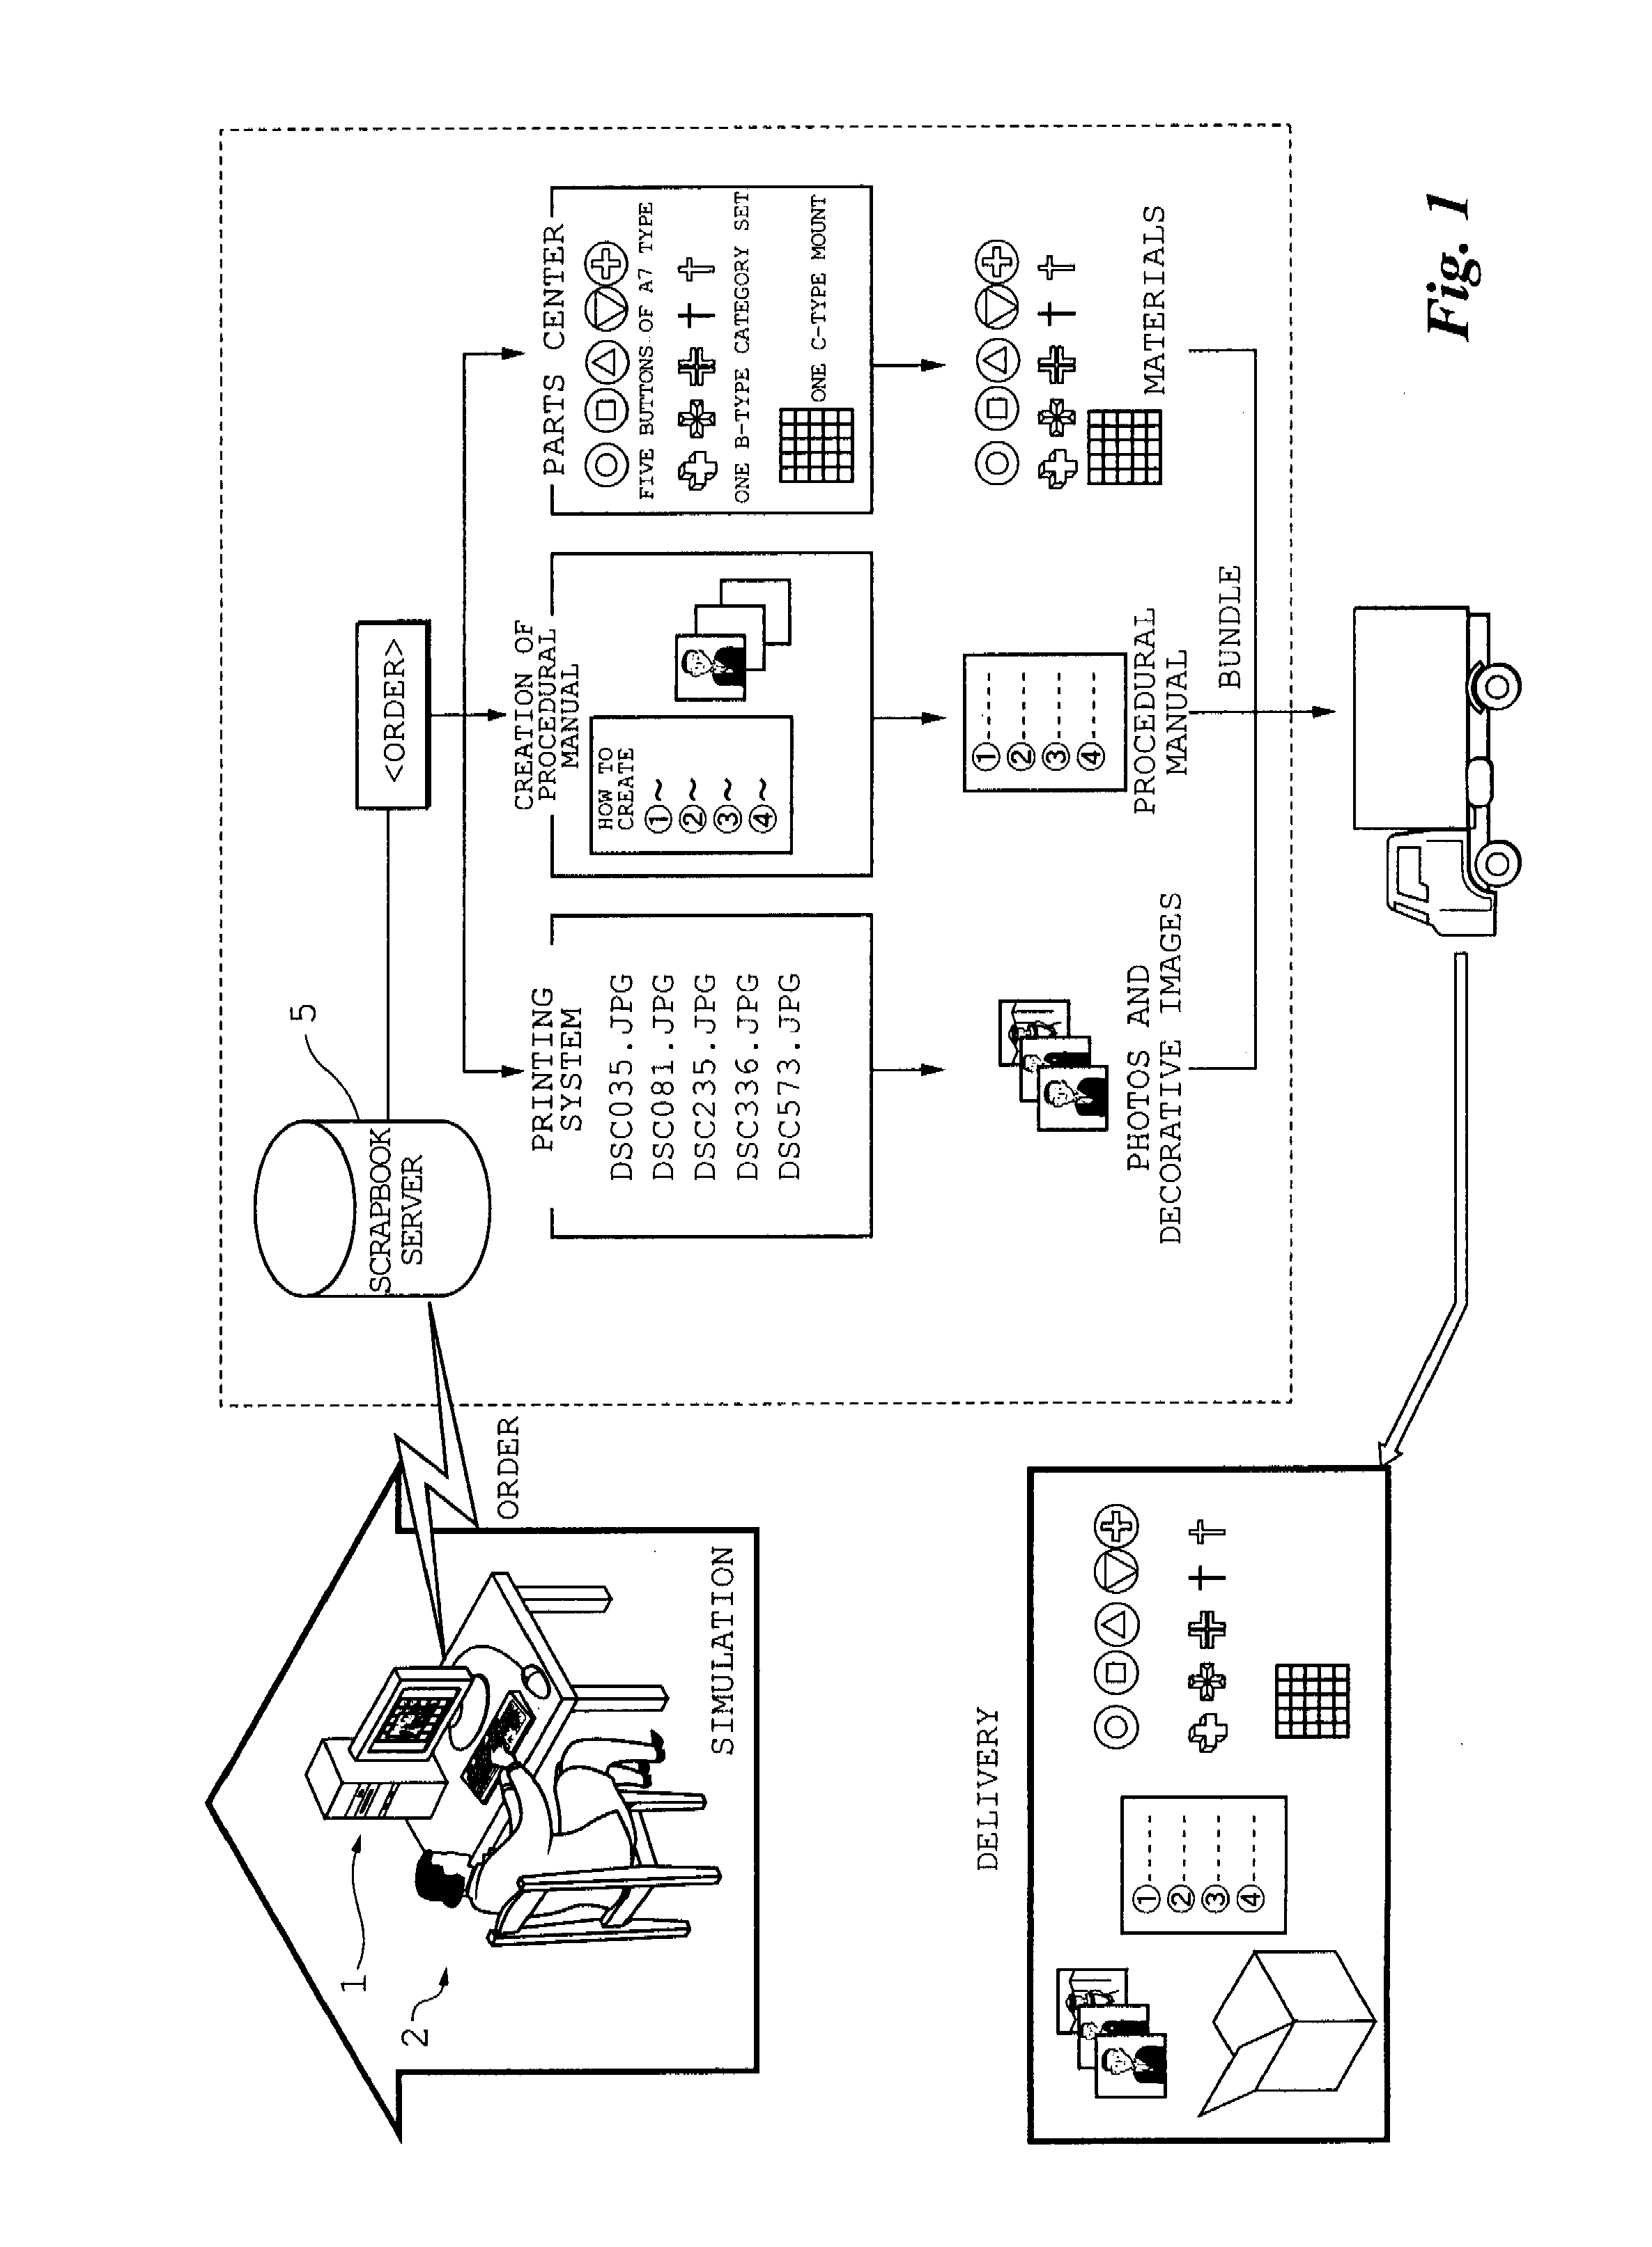 Apparatus for controlling printing of part images of scrapbook, method of controlling same, and control program therefor